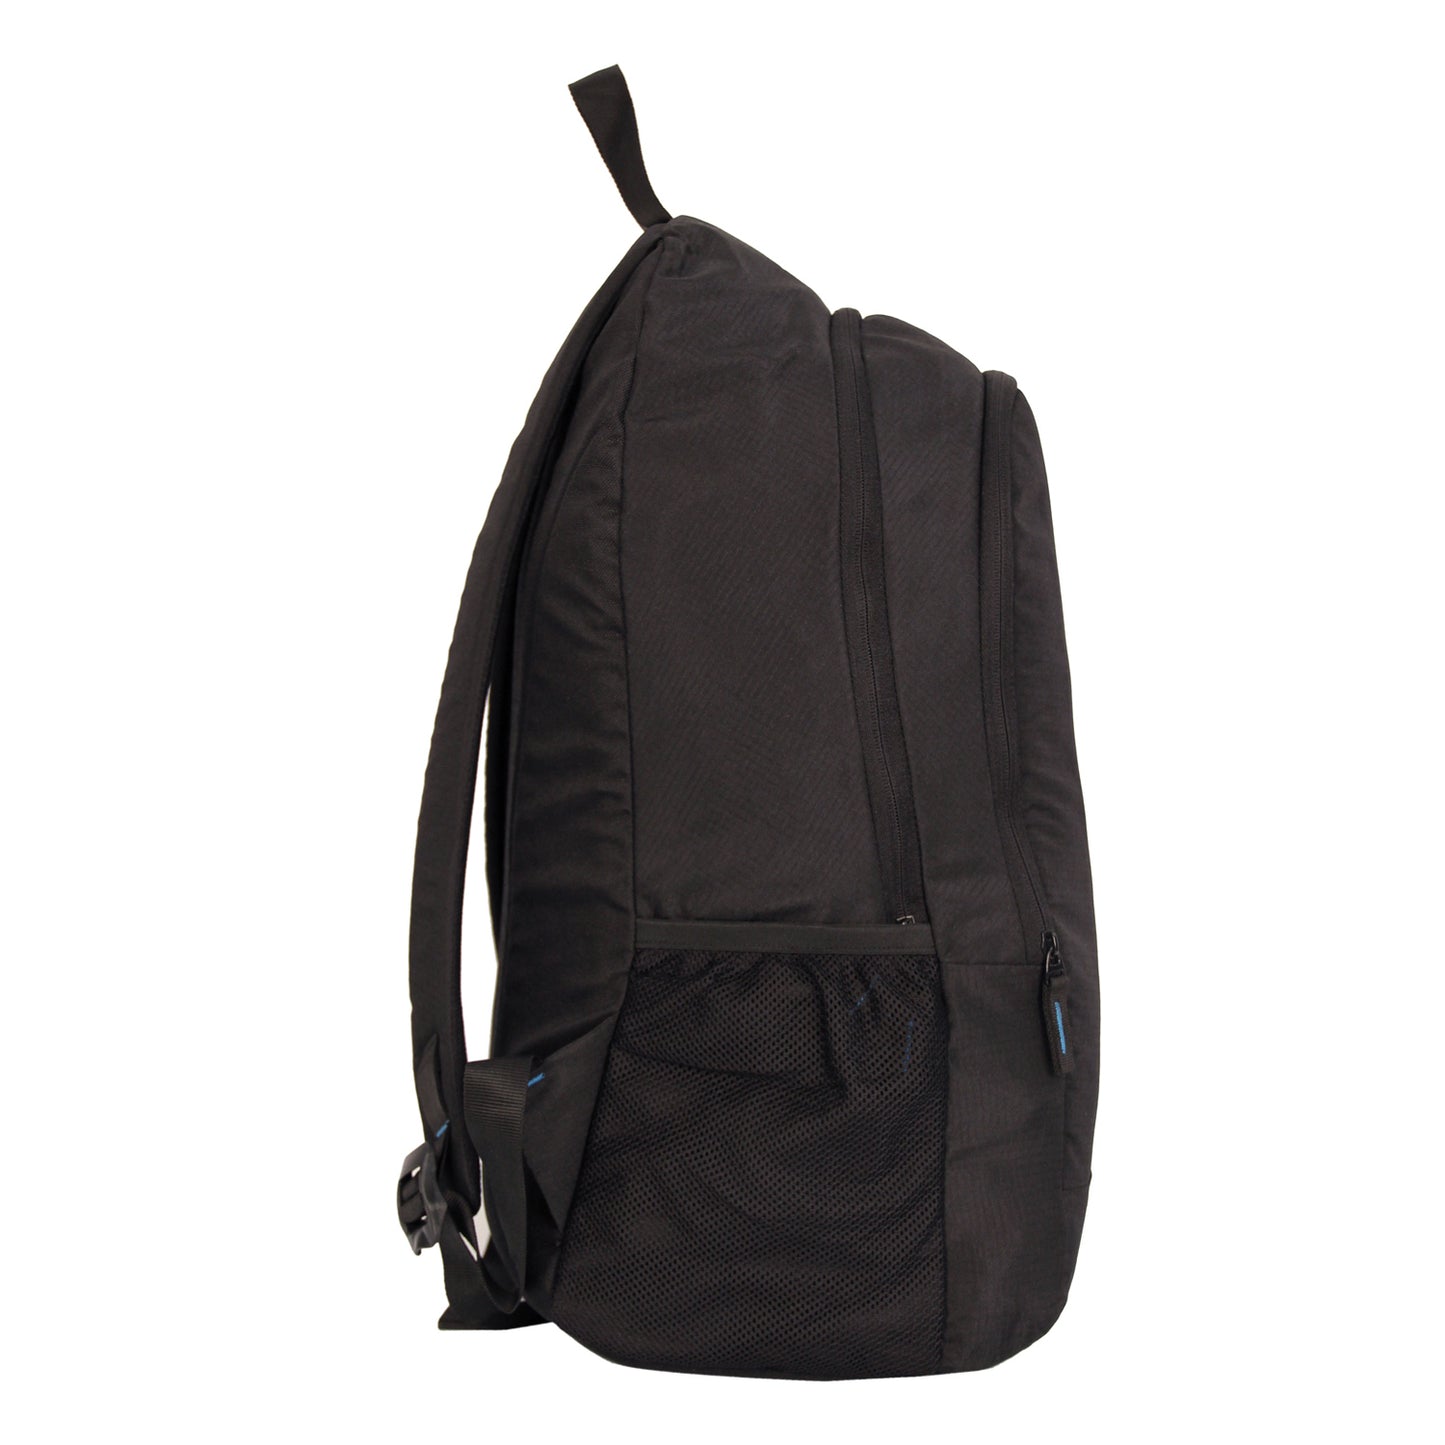 250D Polyester Backpack